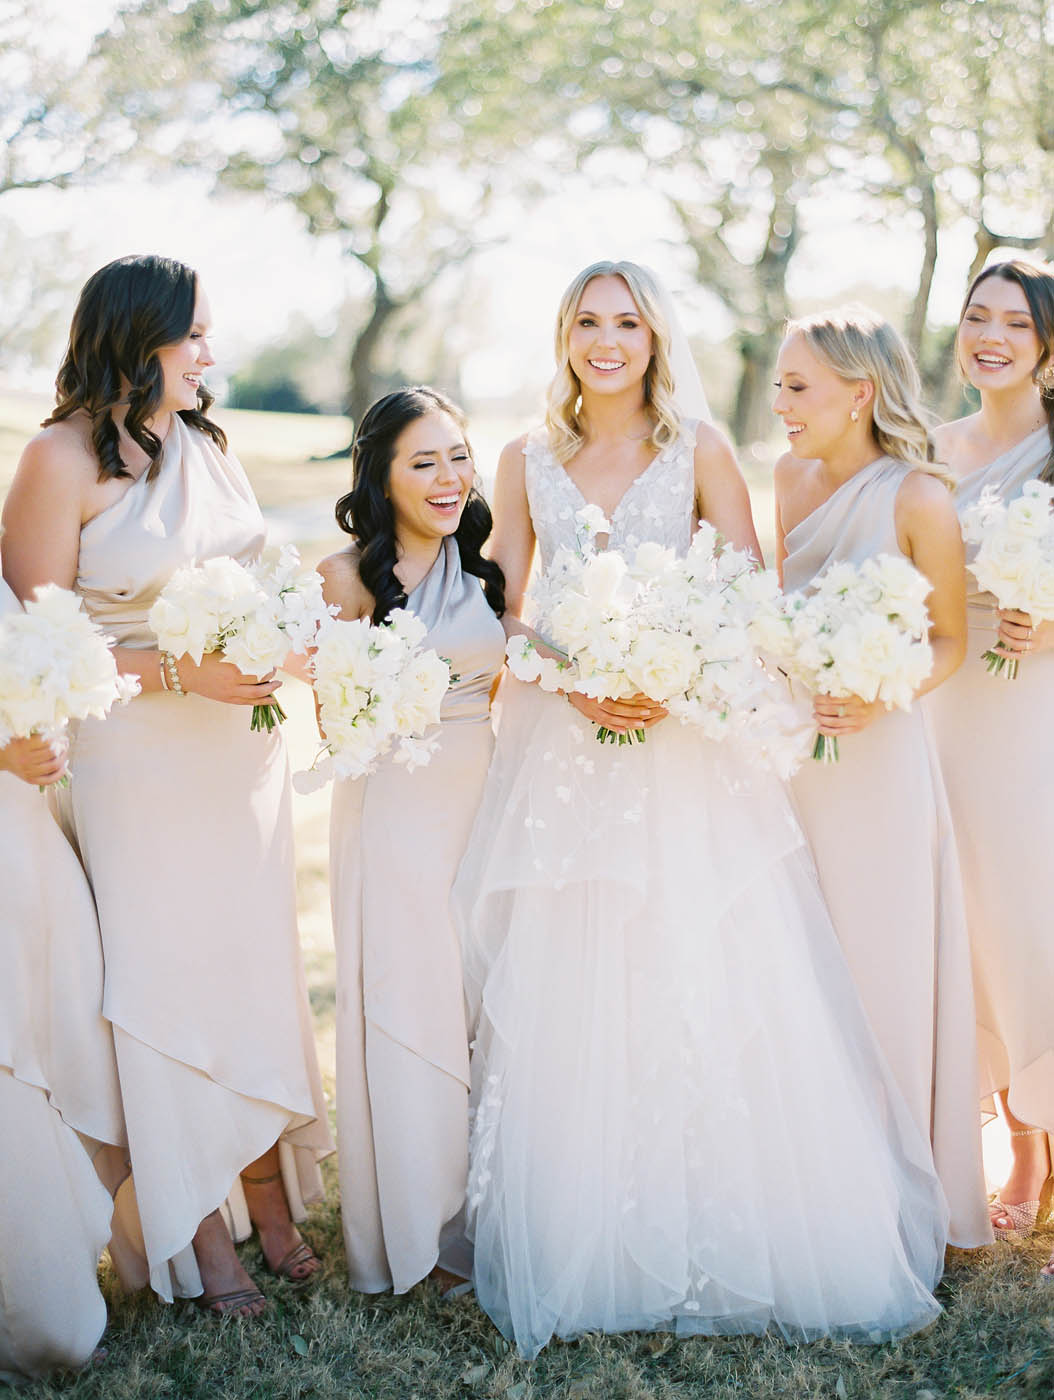 the bride laughs with her bridesmaids